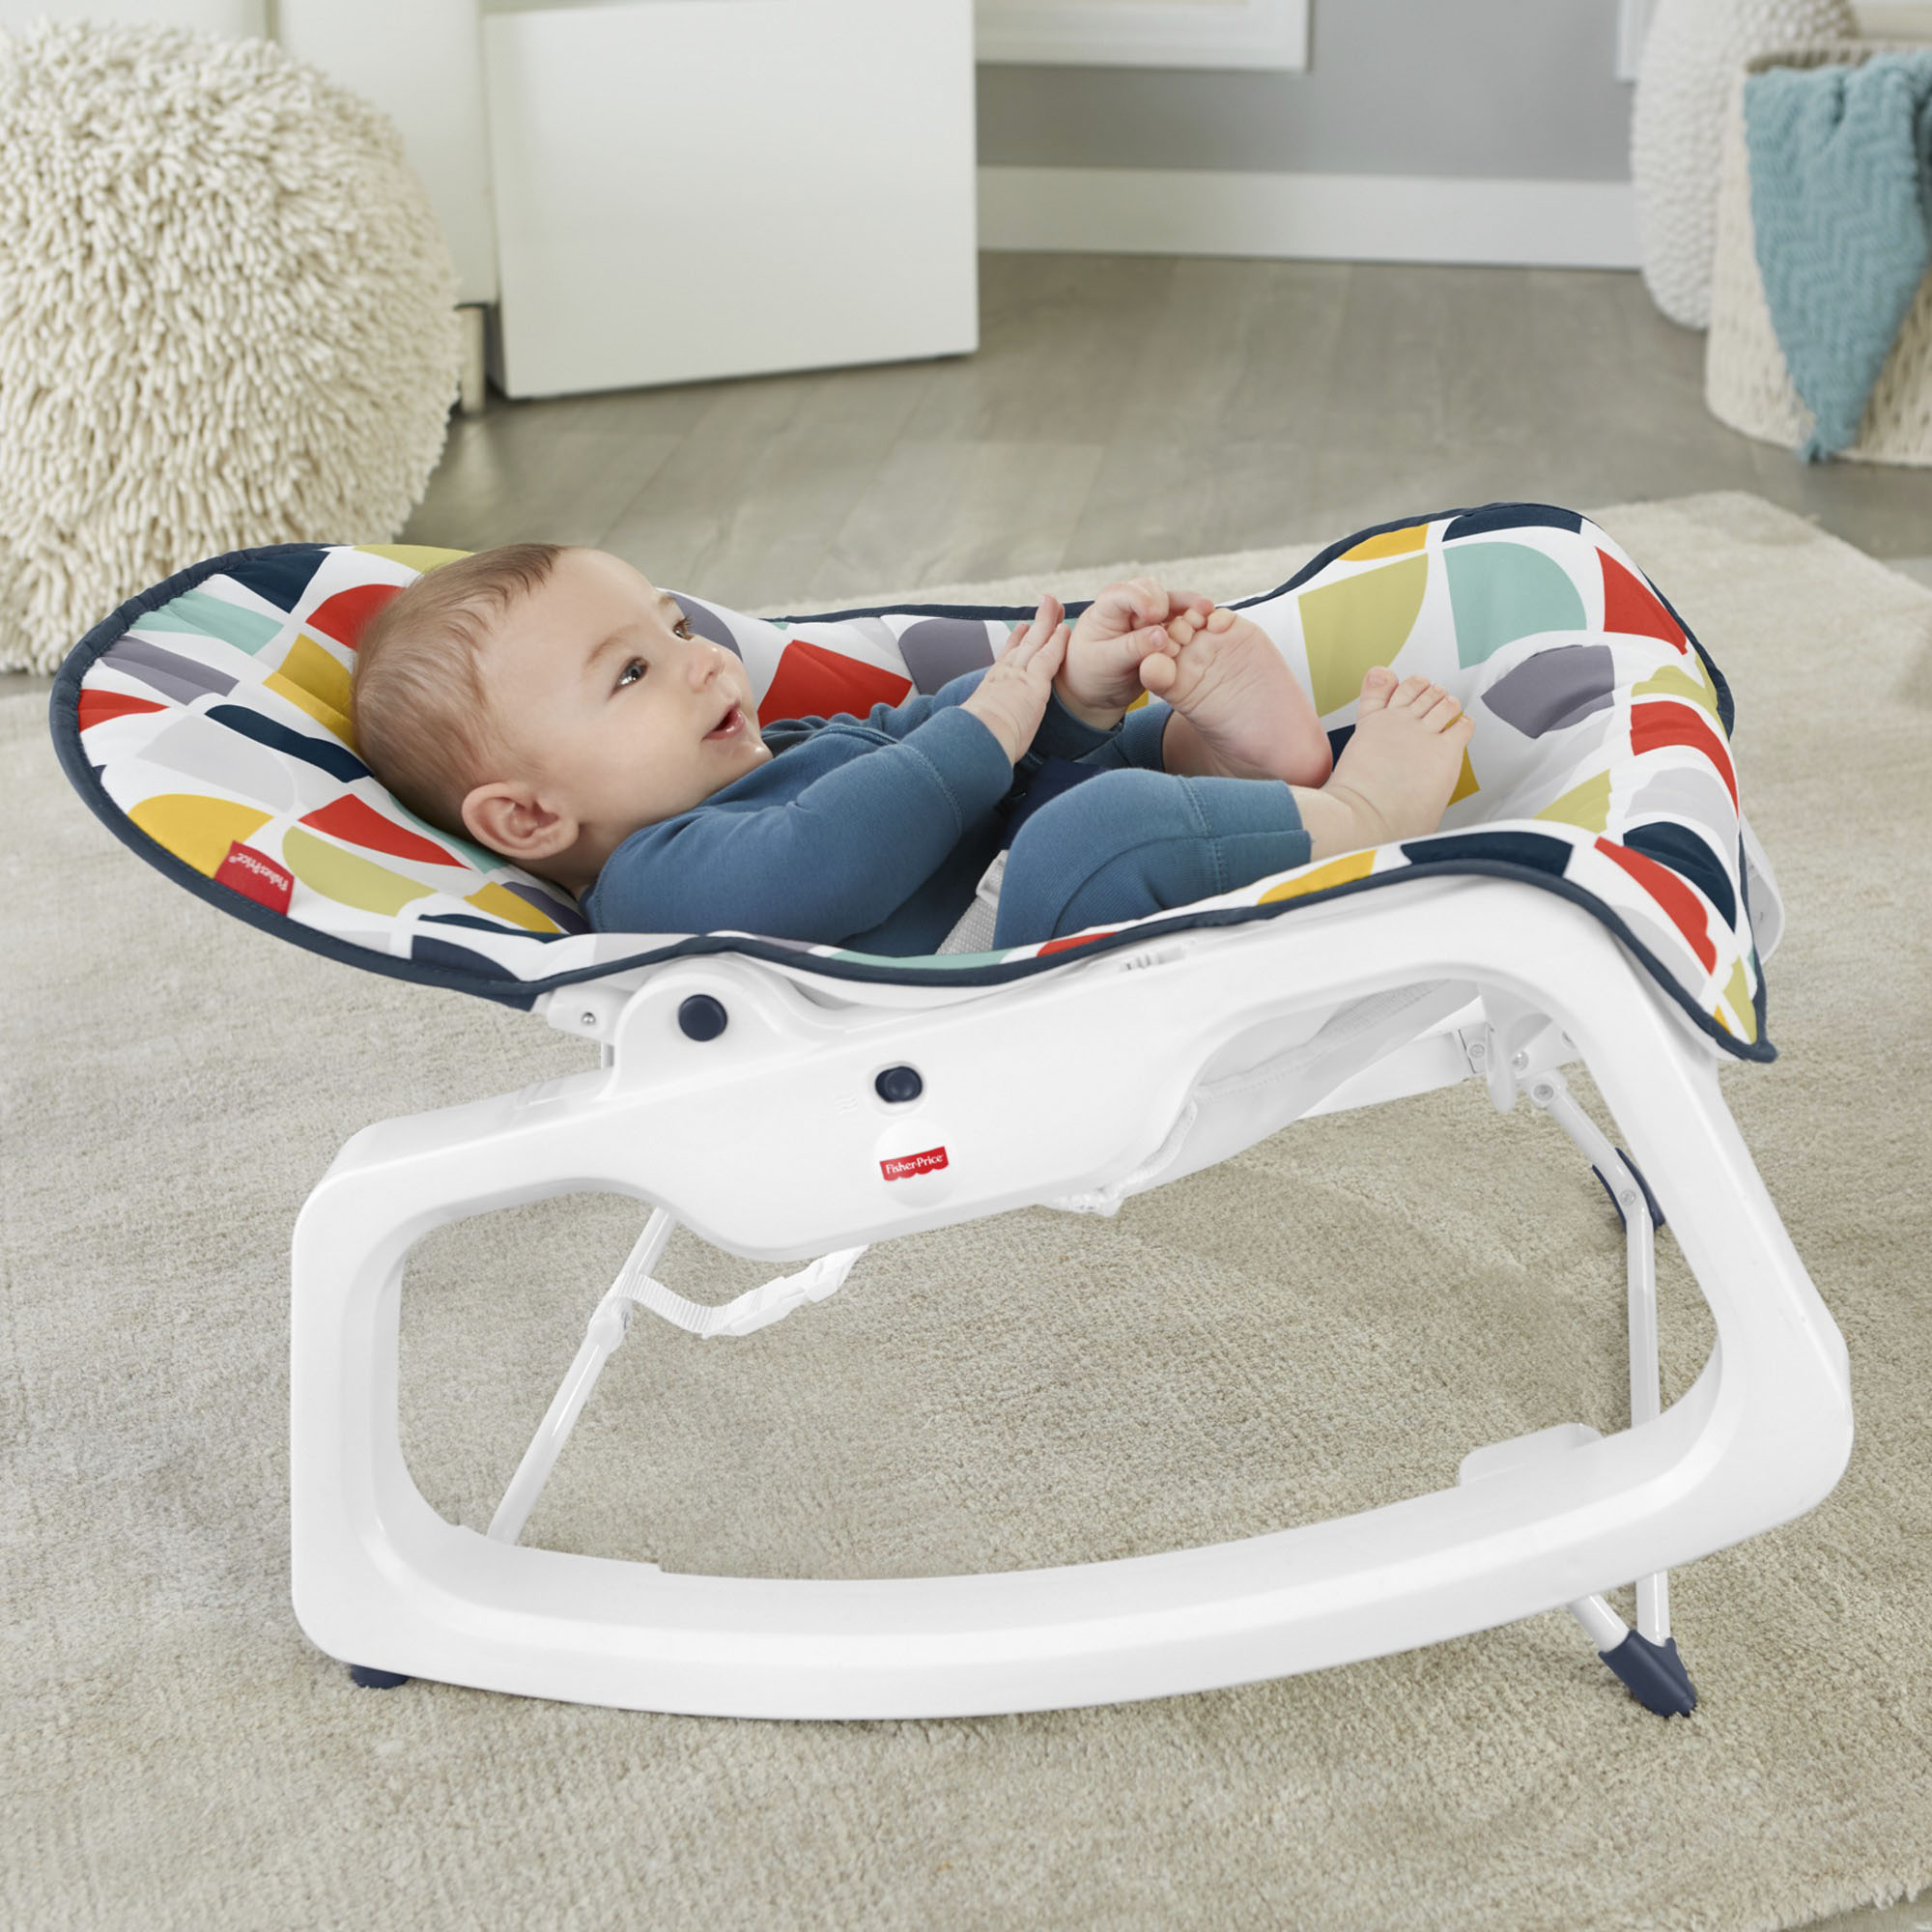 Fisher Price Infant-to-Toddler specifications